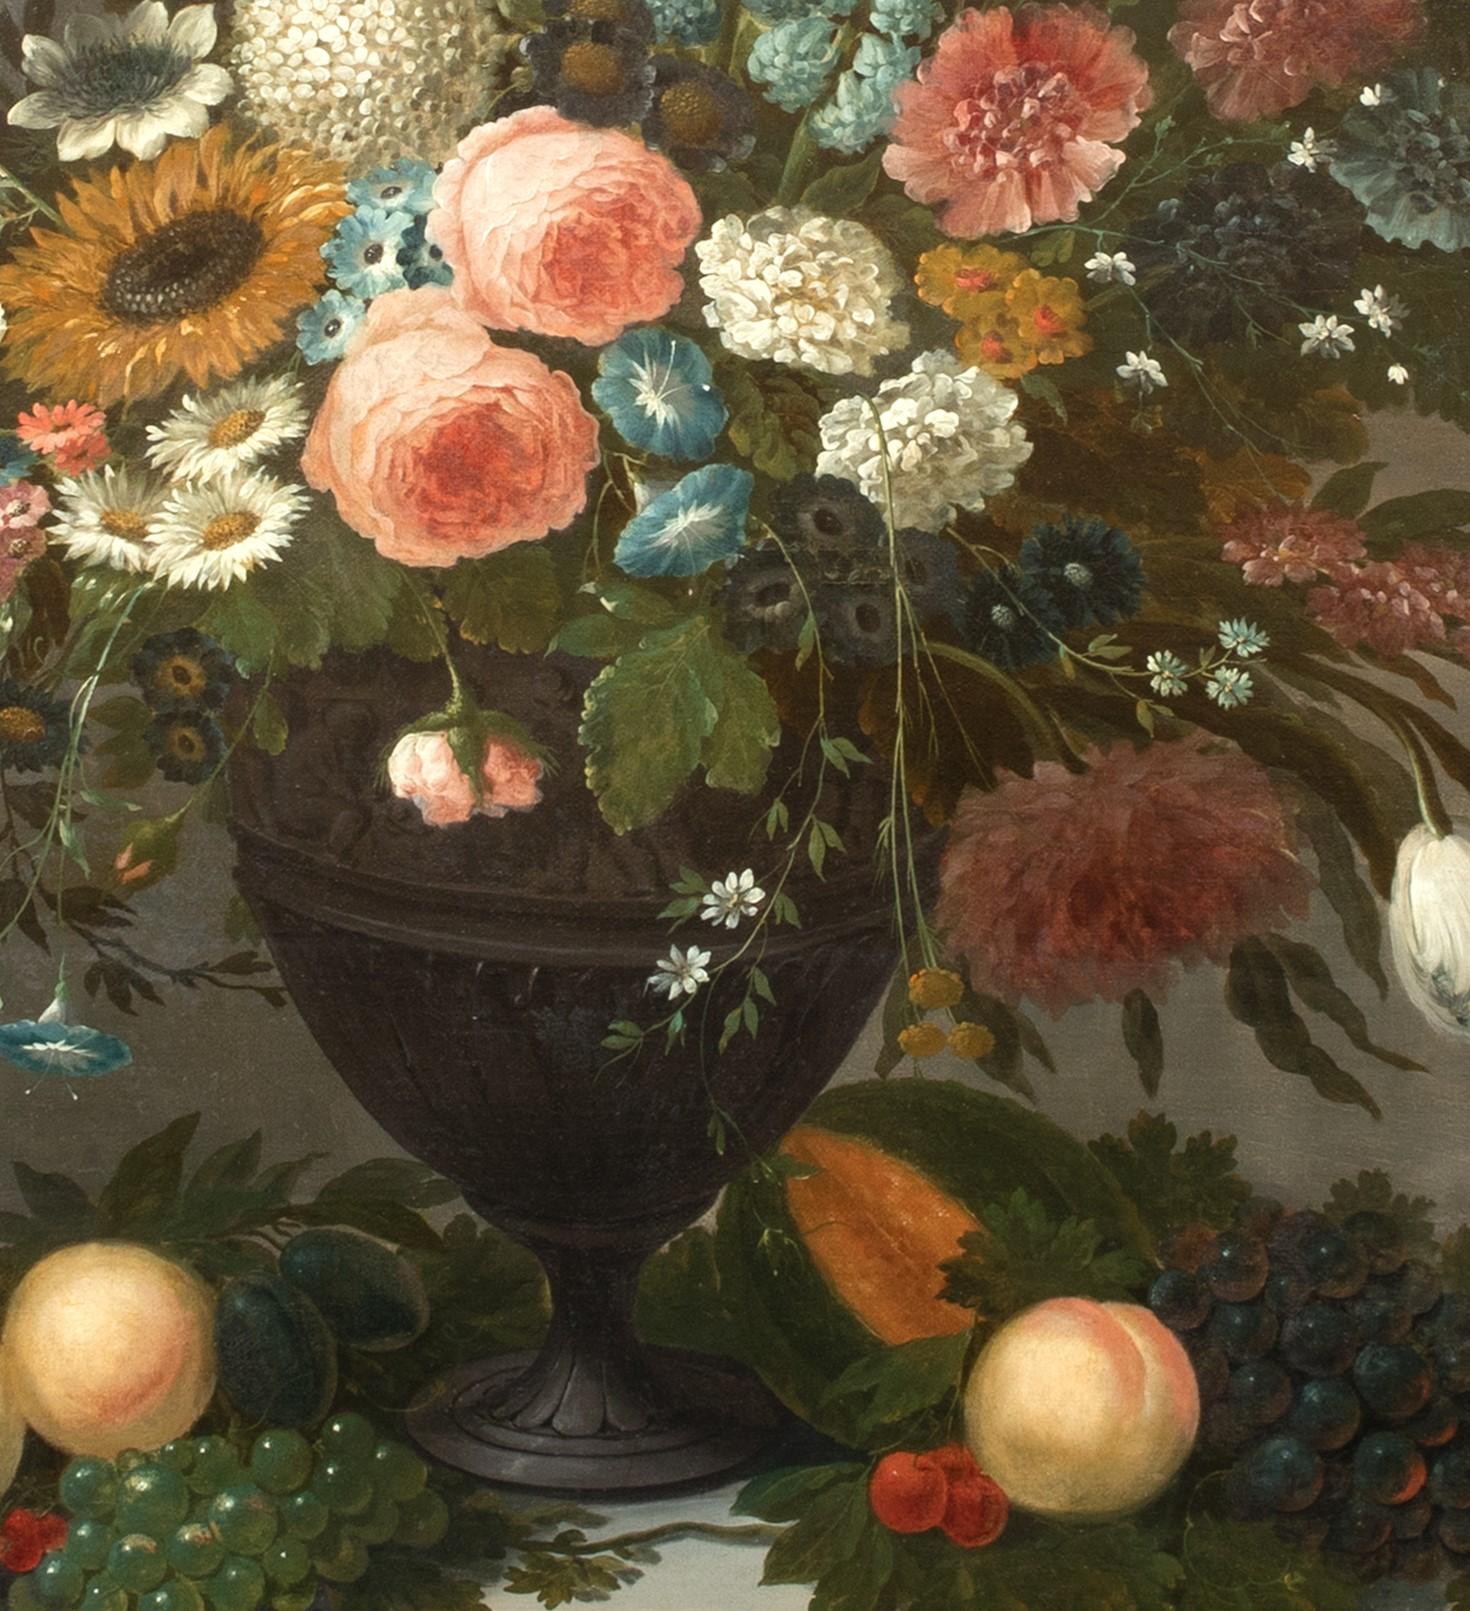 Still Life Of Flowers in a Glass Vase including, Roses Chrysanthemums, Pinks  - Black Still-Life Painting by Unknown